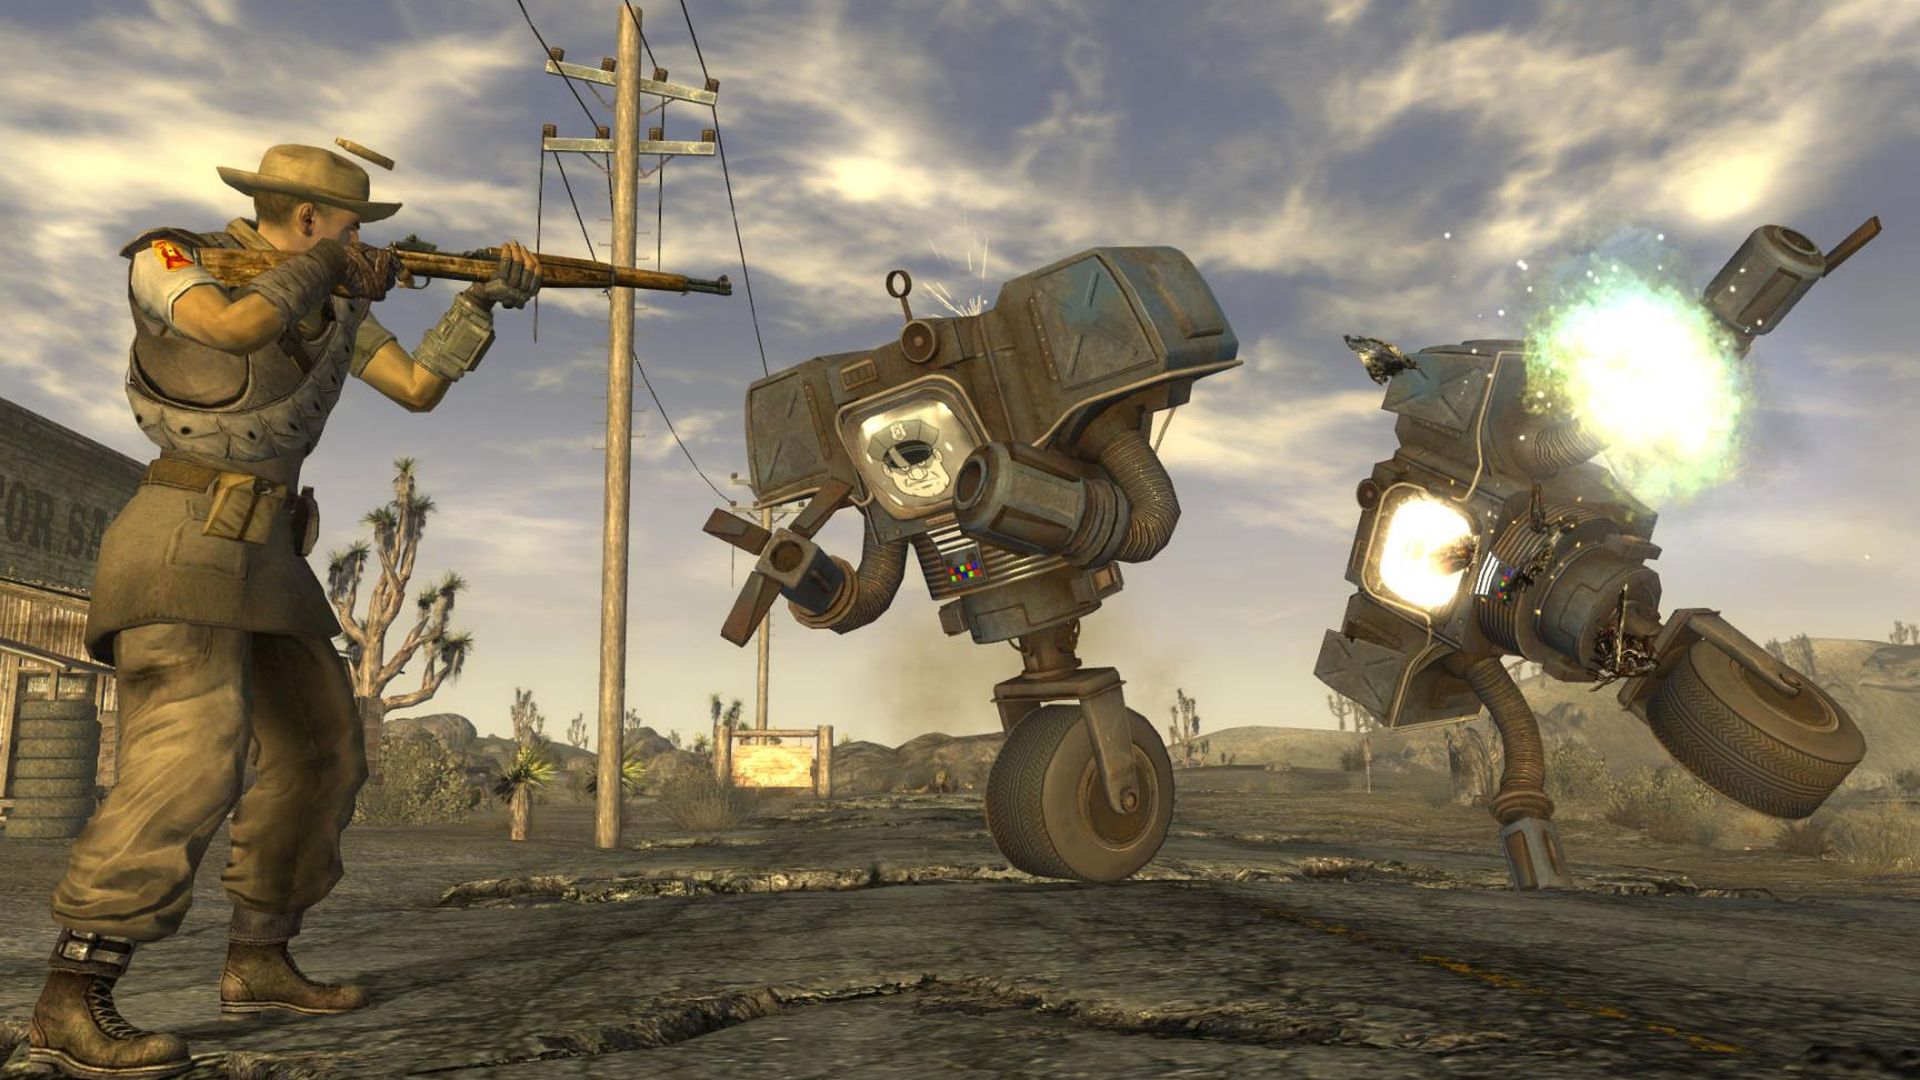 Fallout: New Vegas Dev Would Love To Make Another Fallout Game - GameSpot